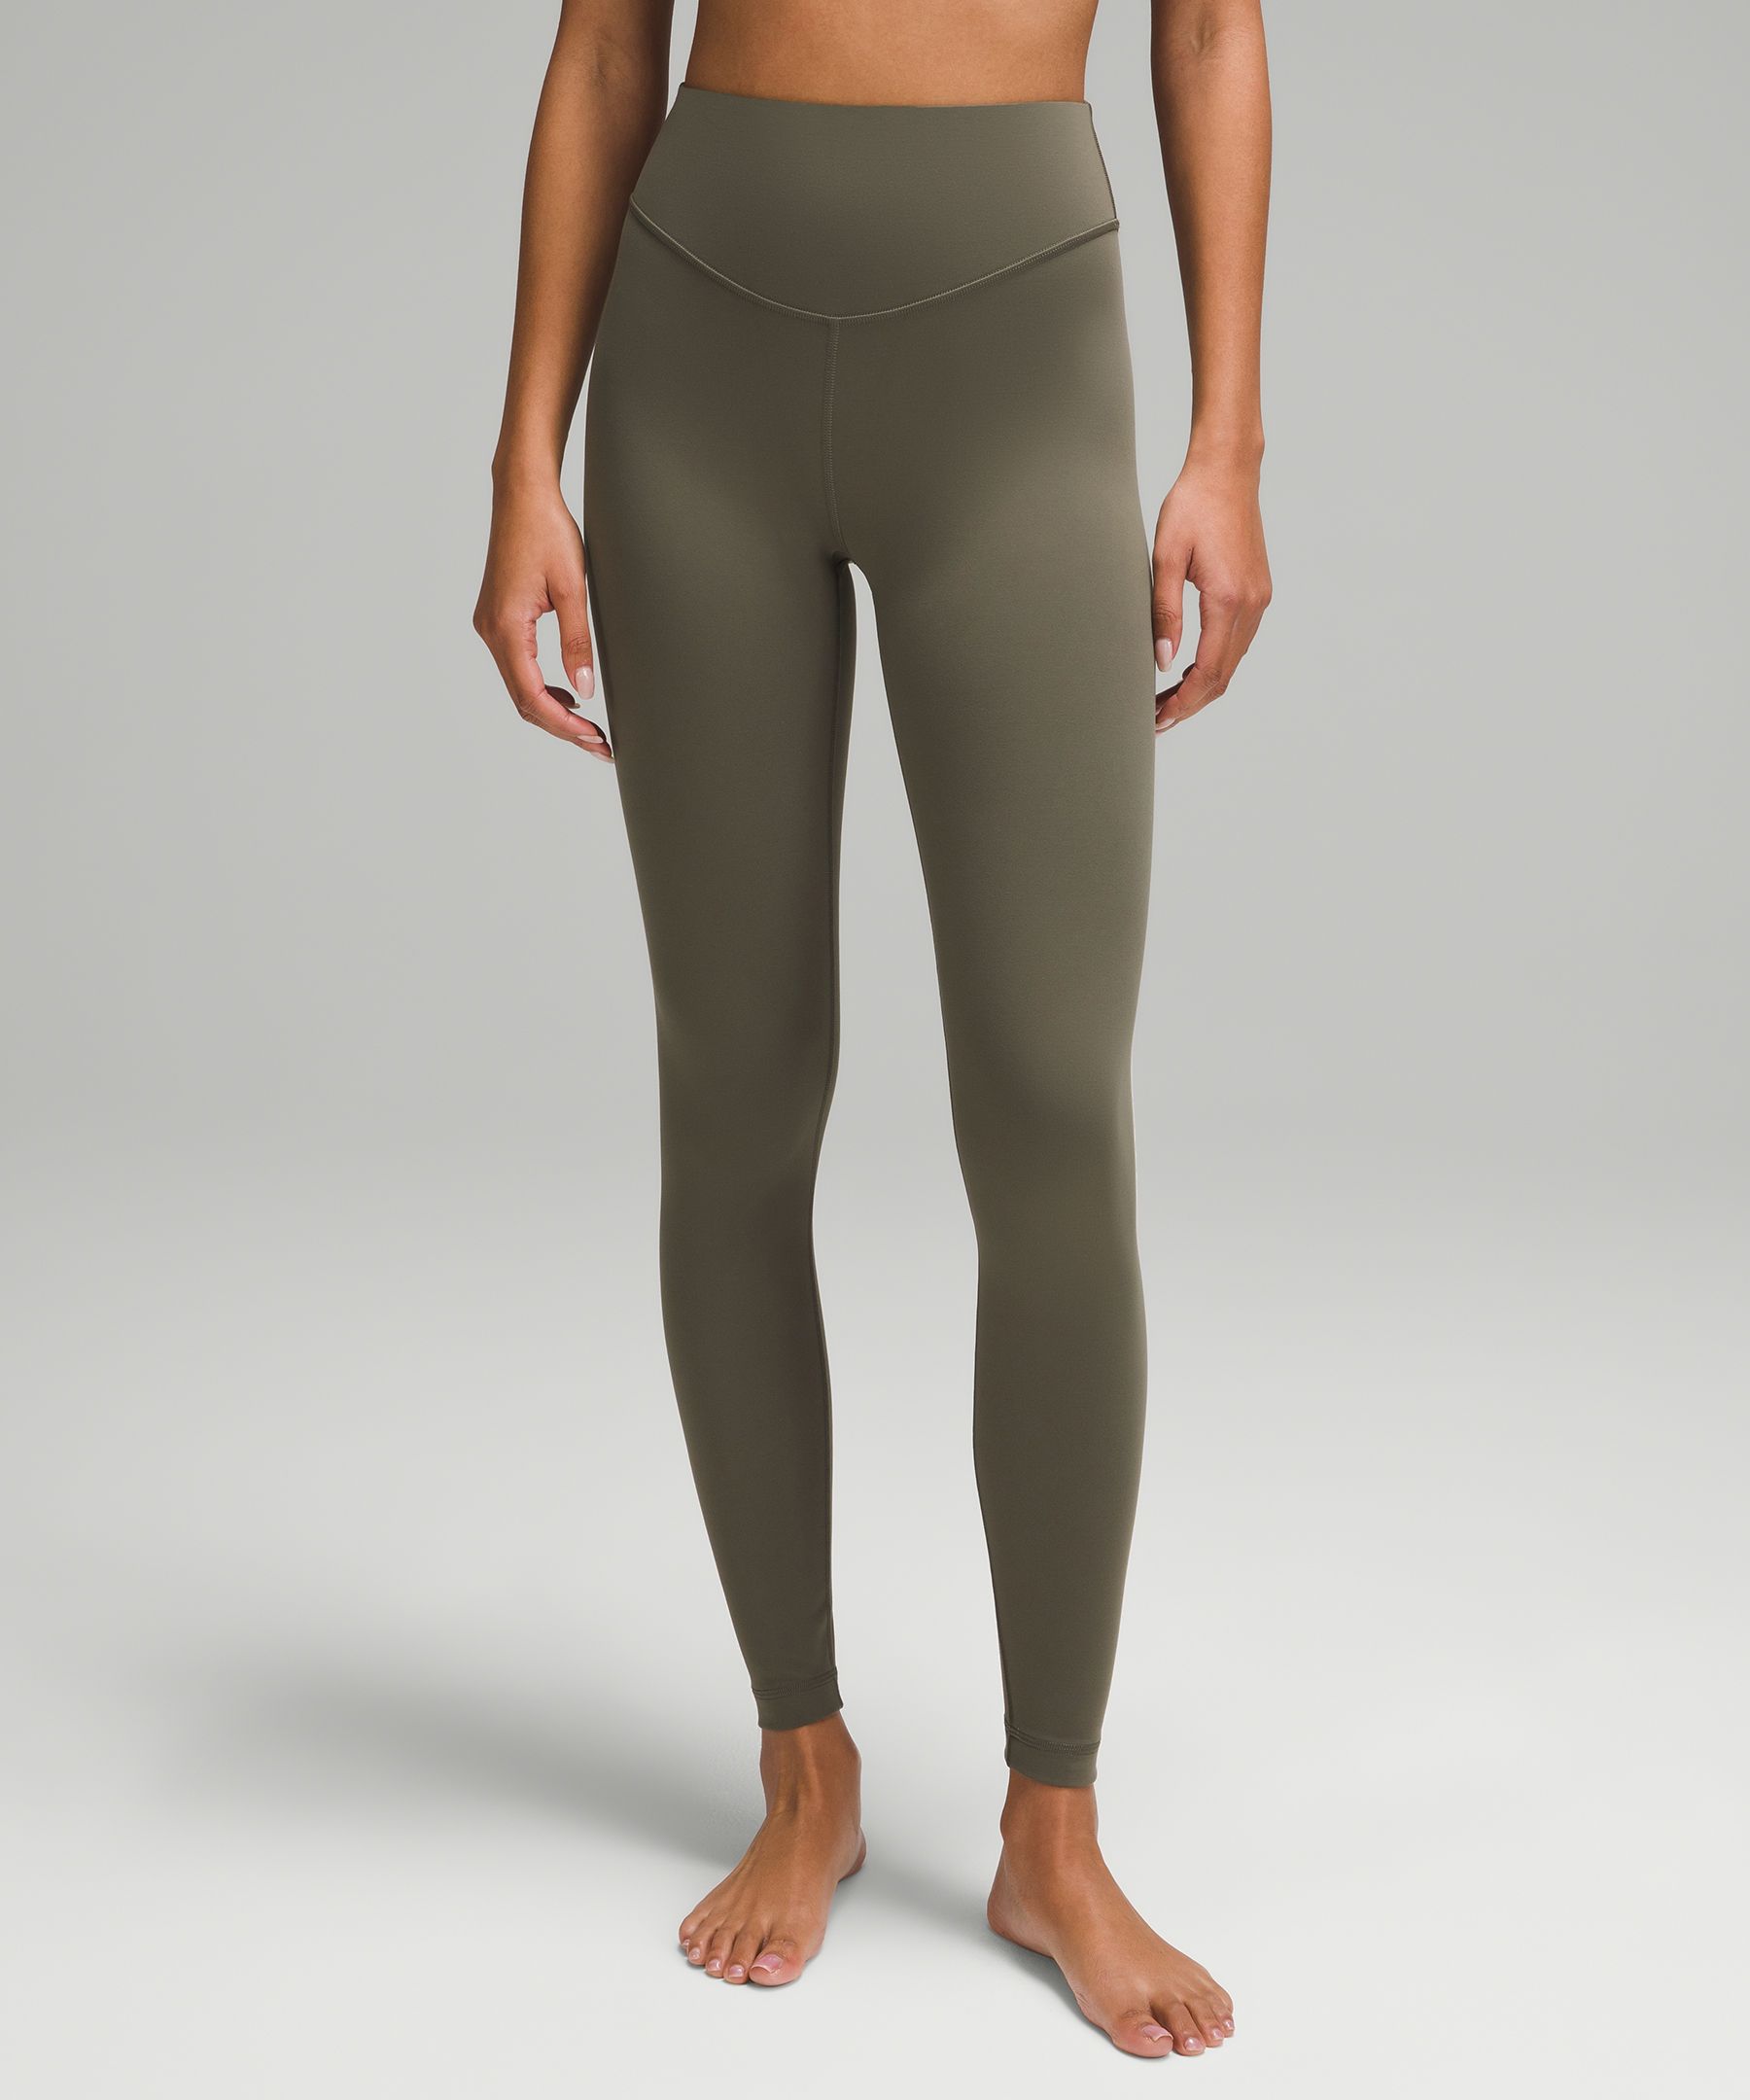 Lululemon athletica Wunder Under SmoothCover High-Rise Tight 28, Women's  Pants